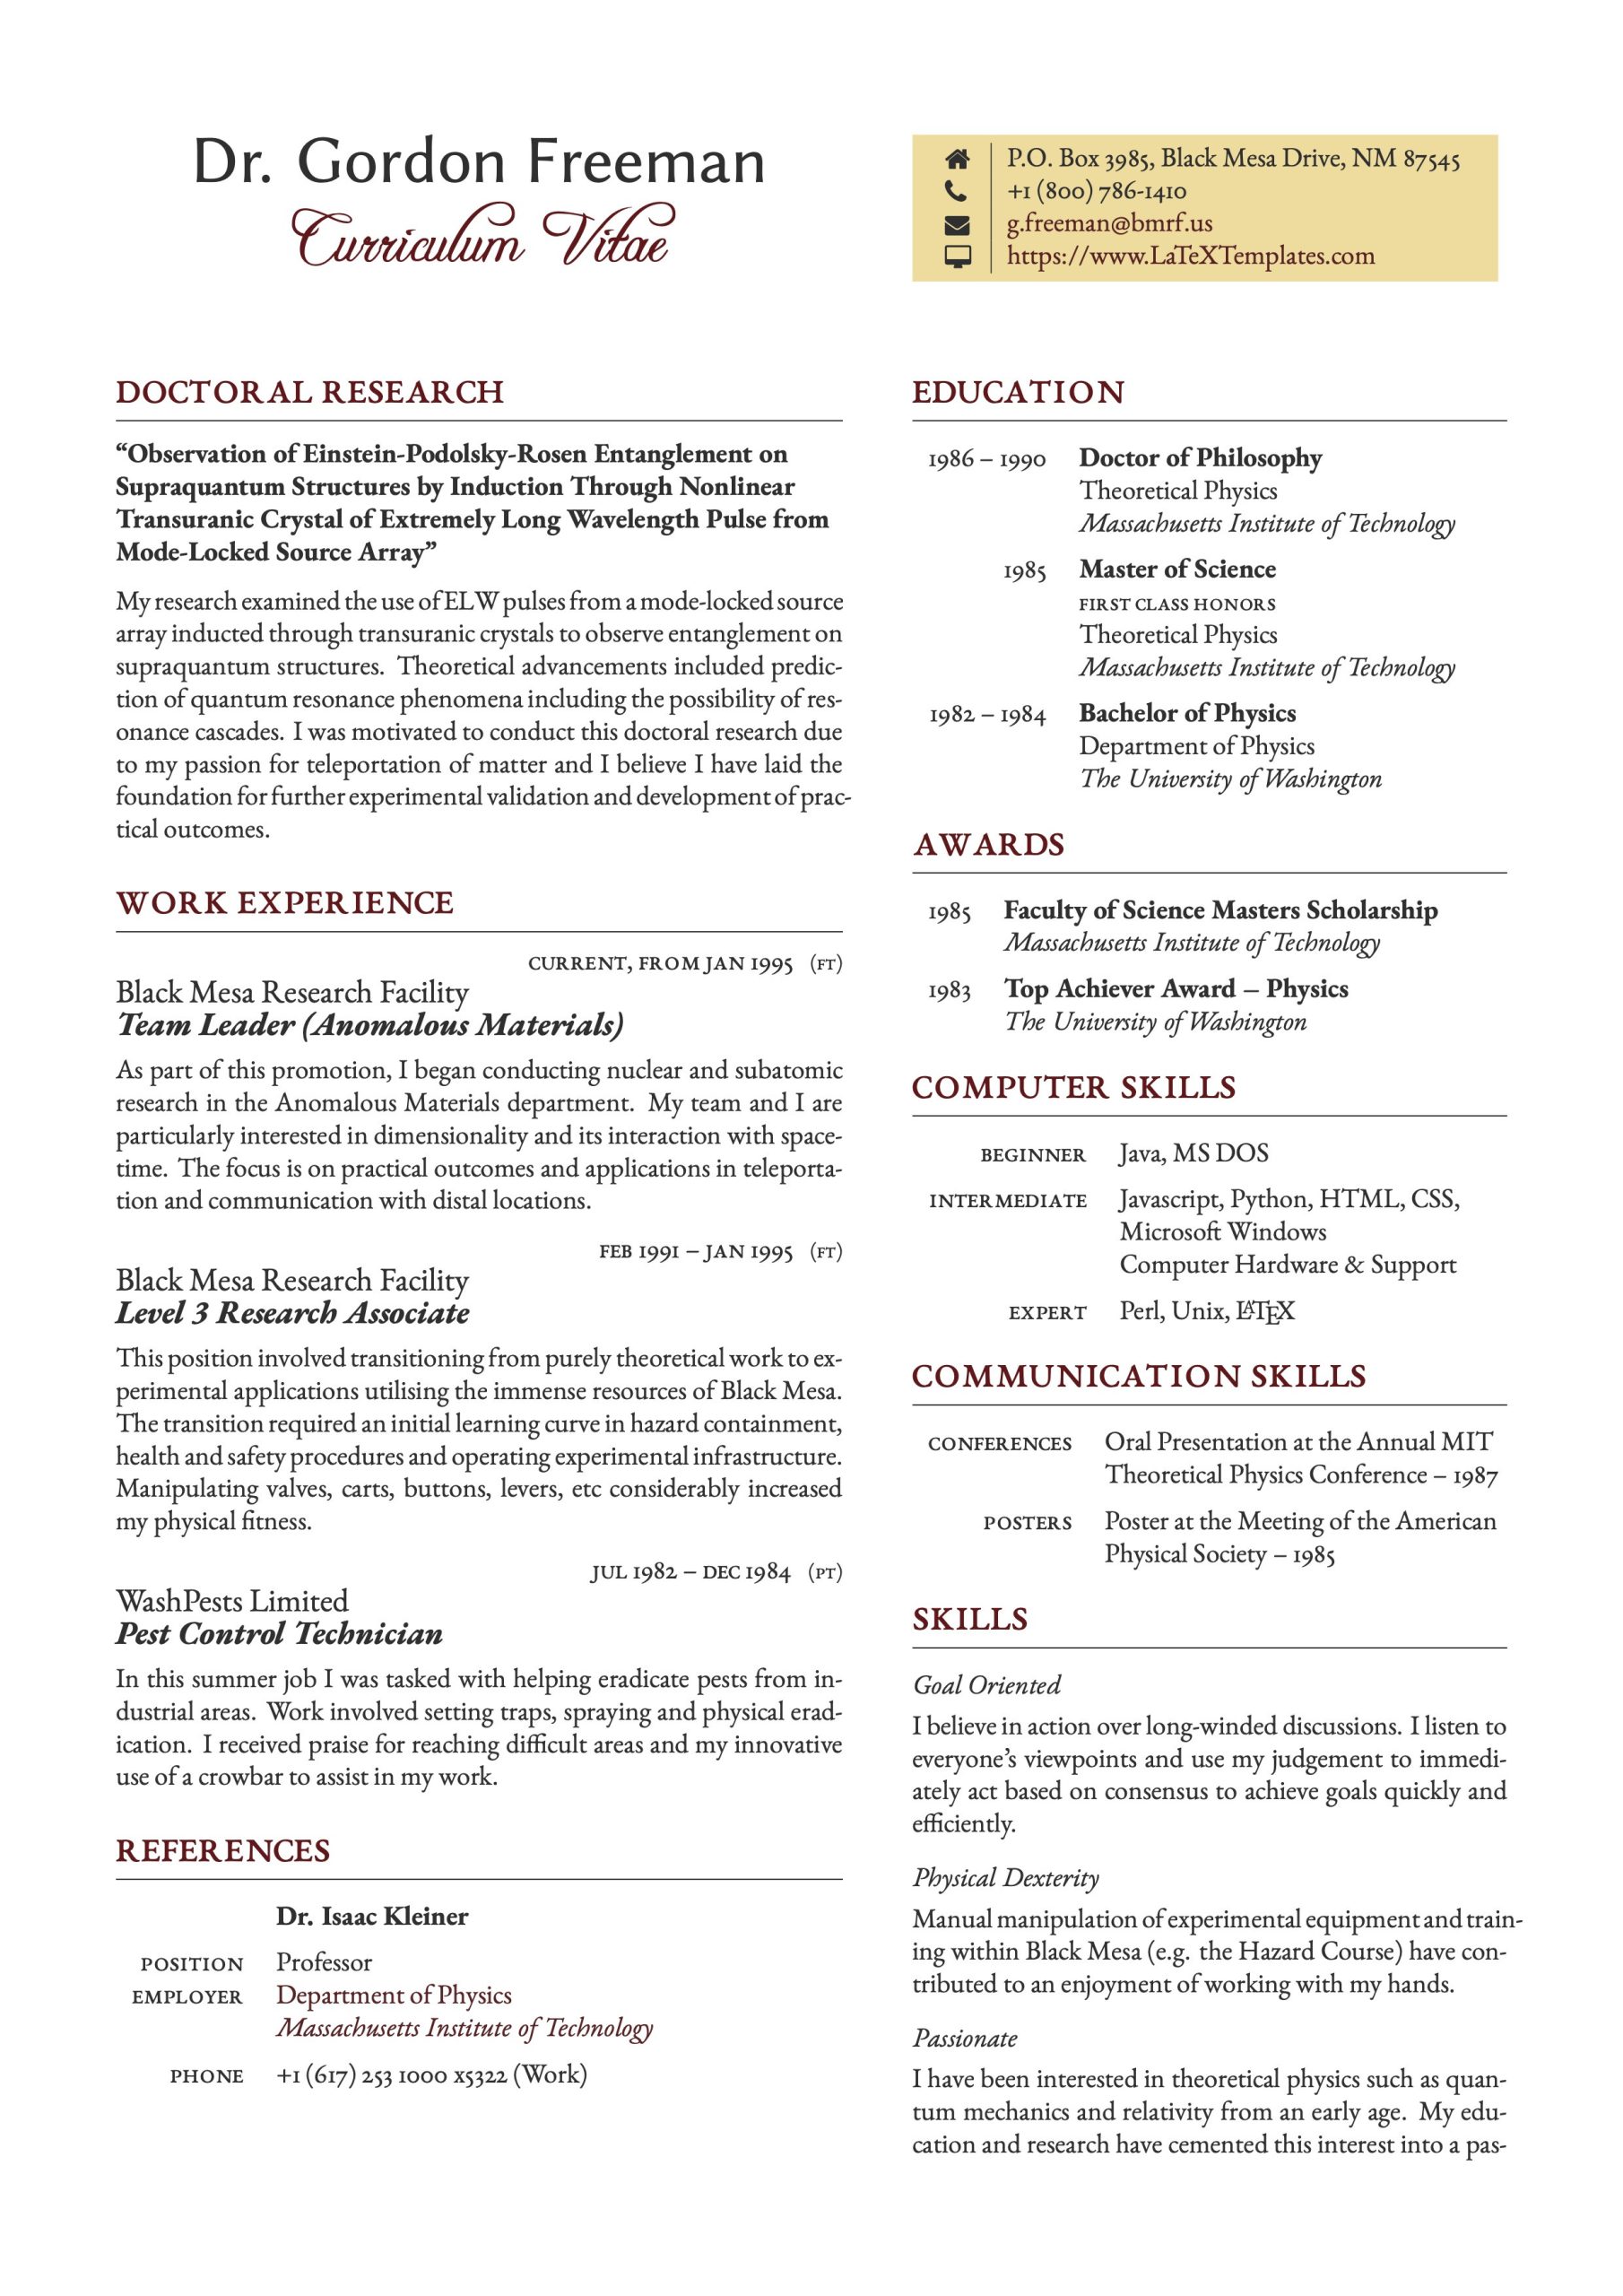 Sample Resume for Msc Physics Fresher Latex Templates – Cvs and Resumes